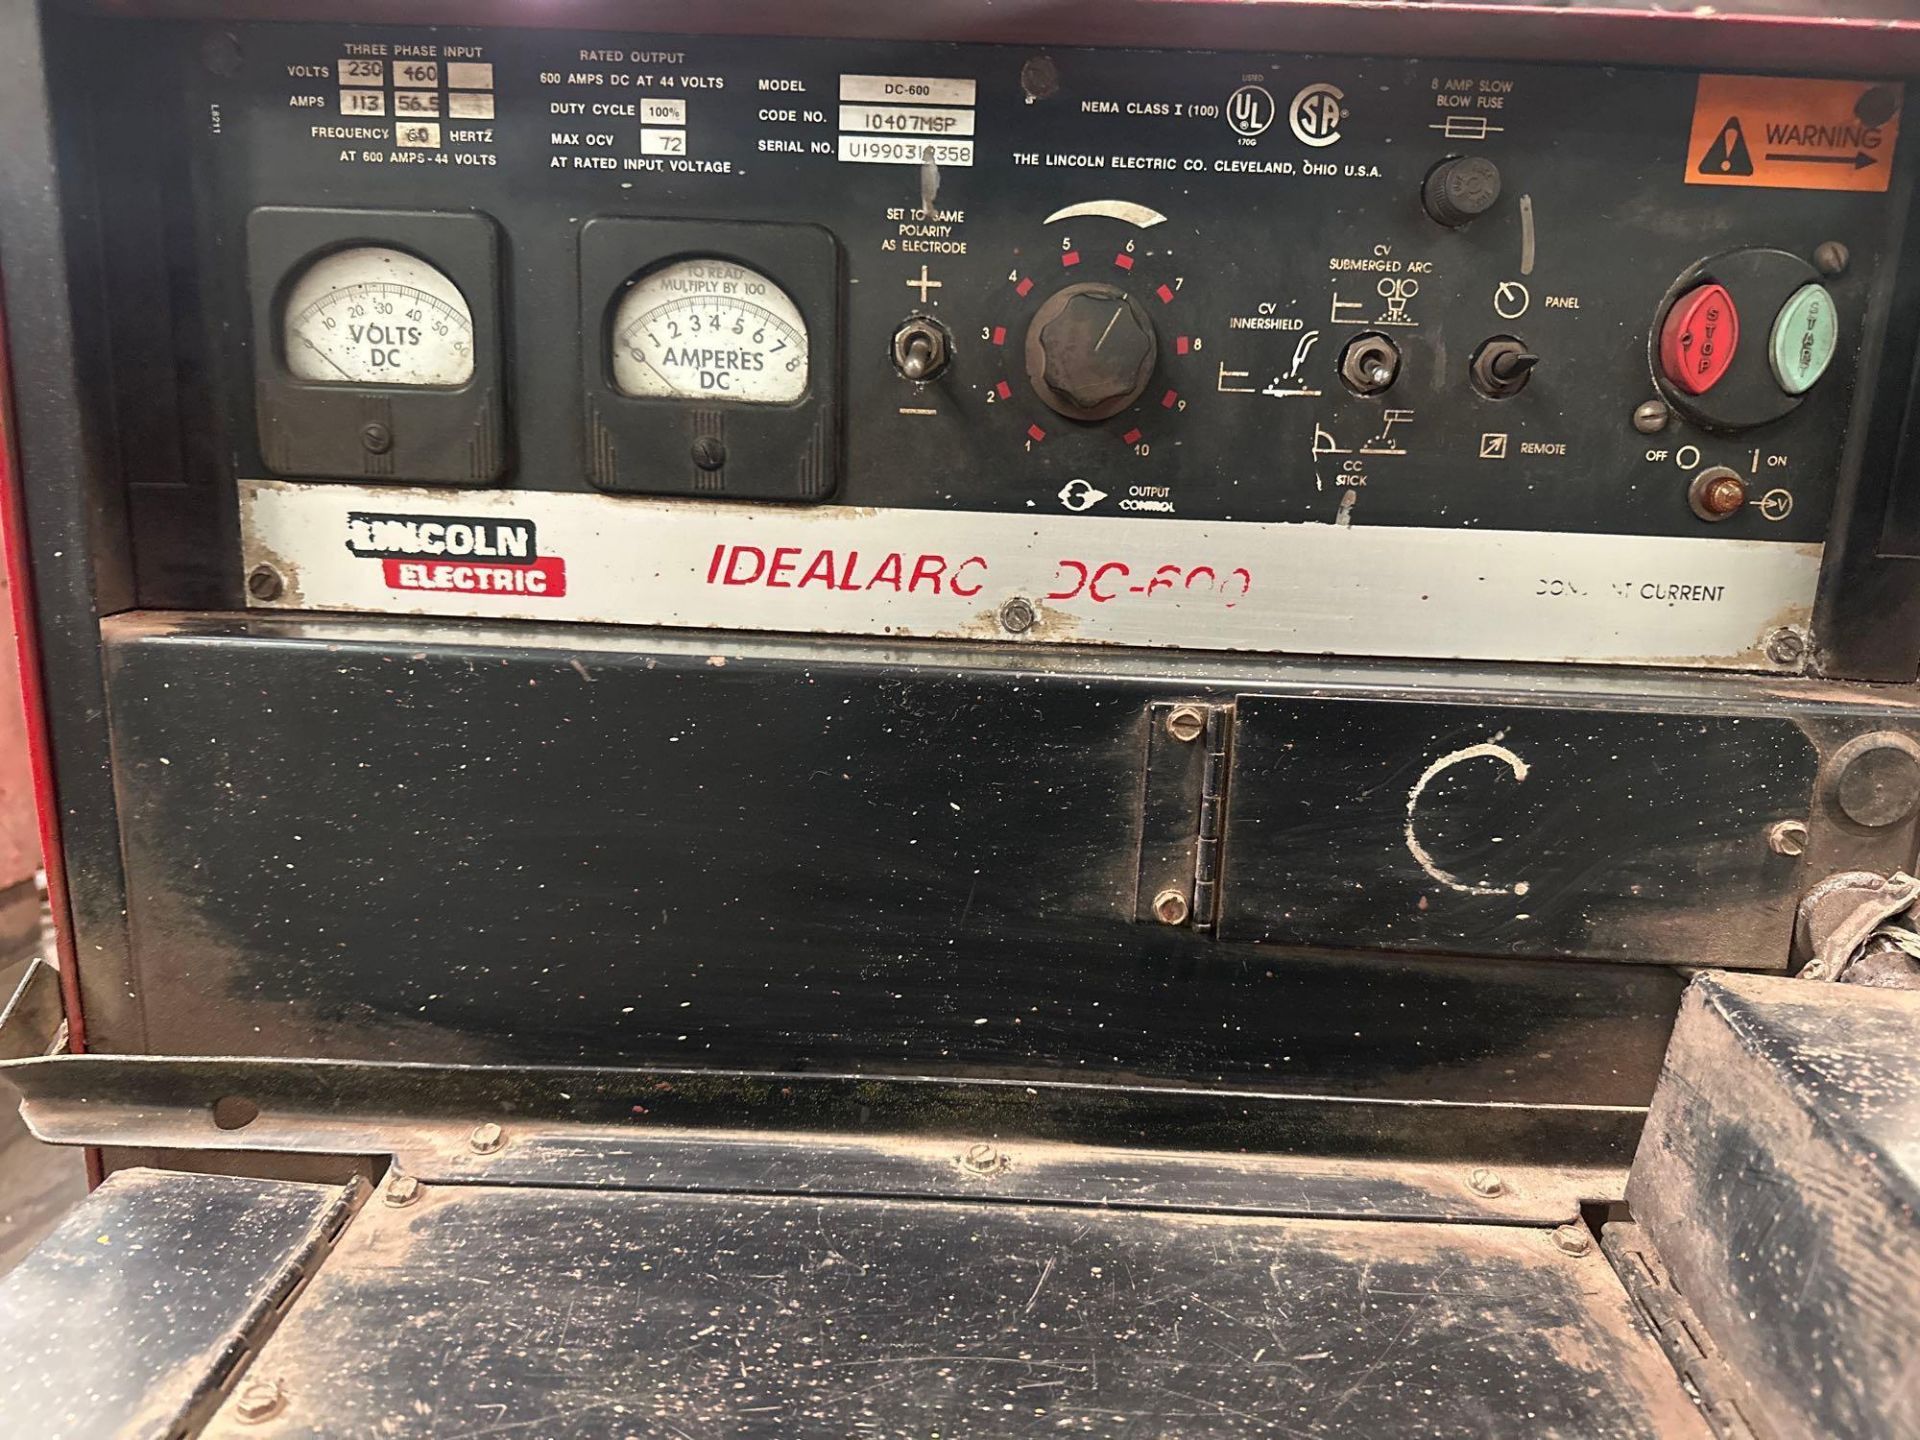 Lincoln Electric Idealarc DC-600 Welder, s/n U1990319358 *Located in Redlands, CA* - Image 4 of 8